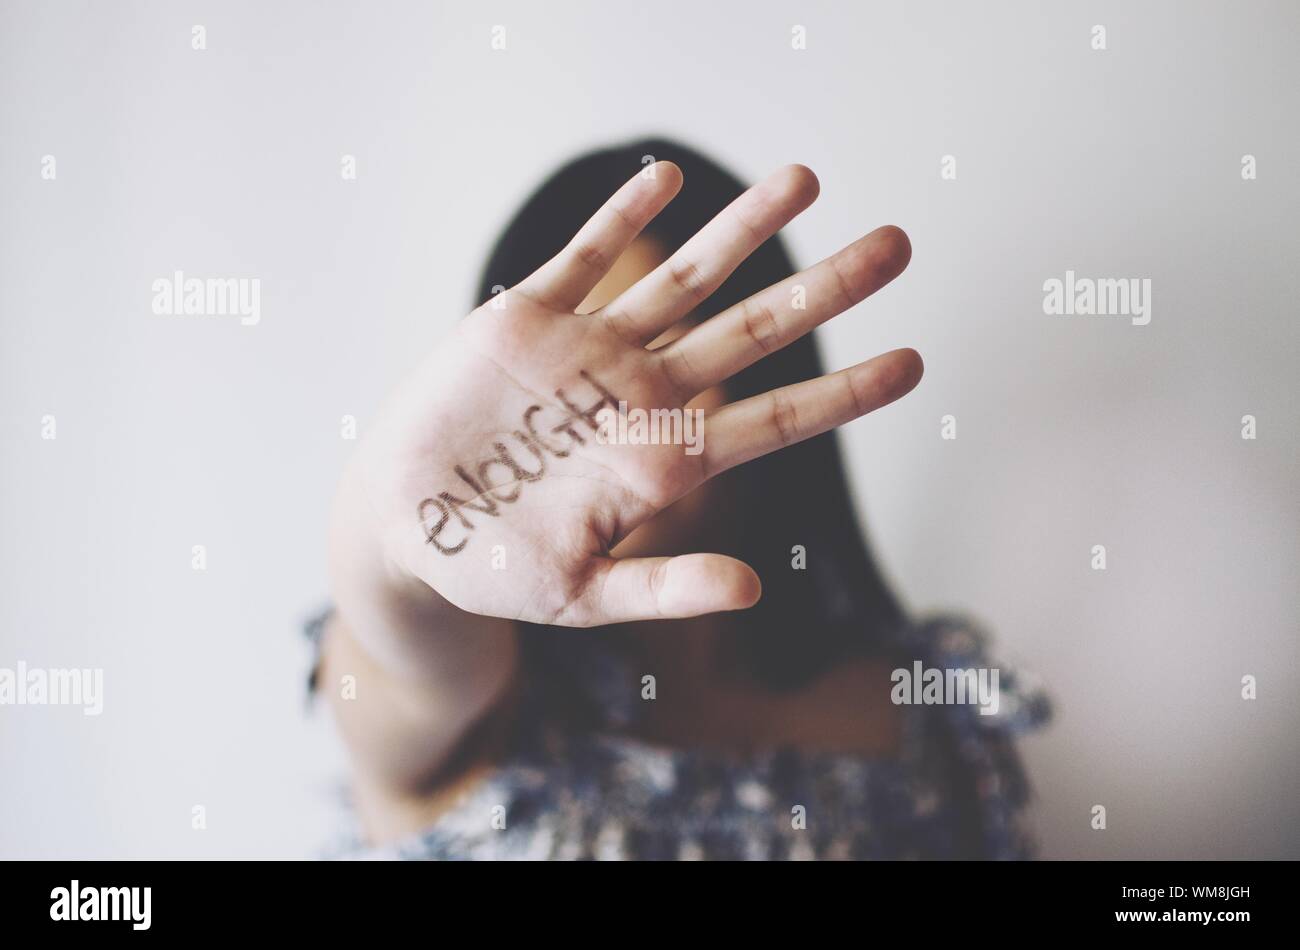 Conceptual Close-up Of An Abused Woman Stock Photo